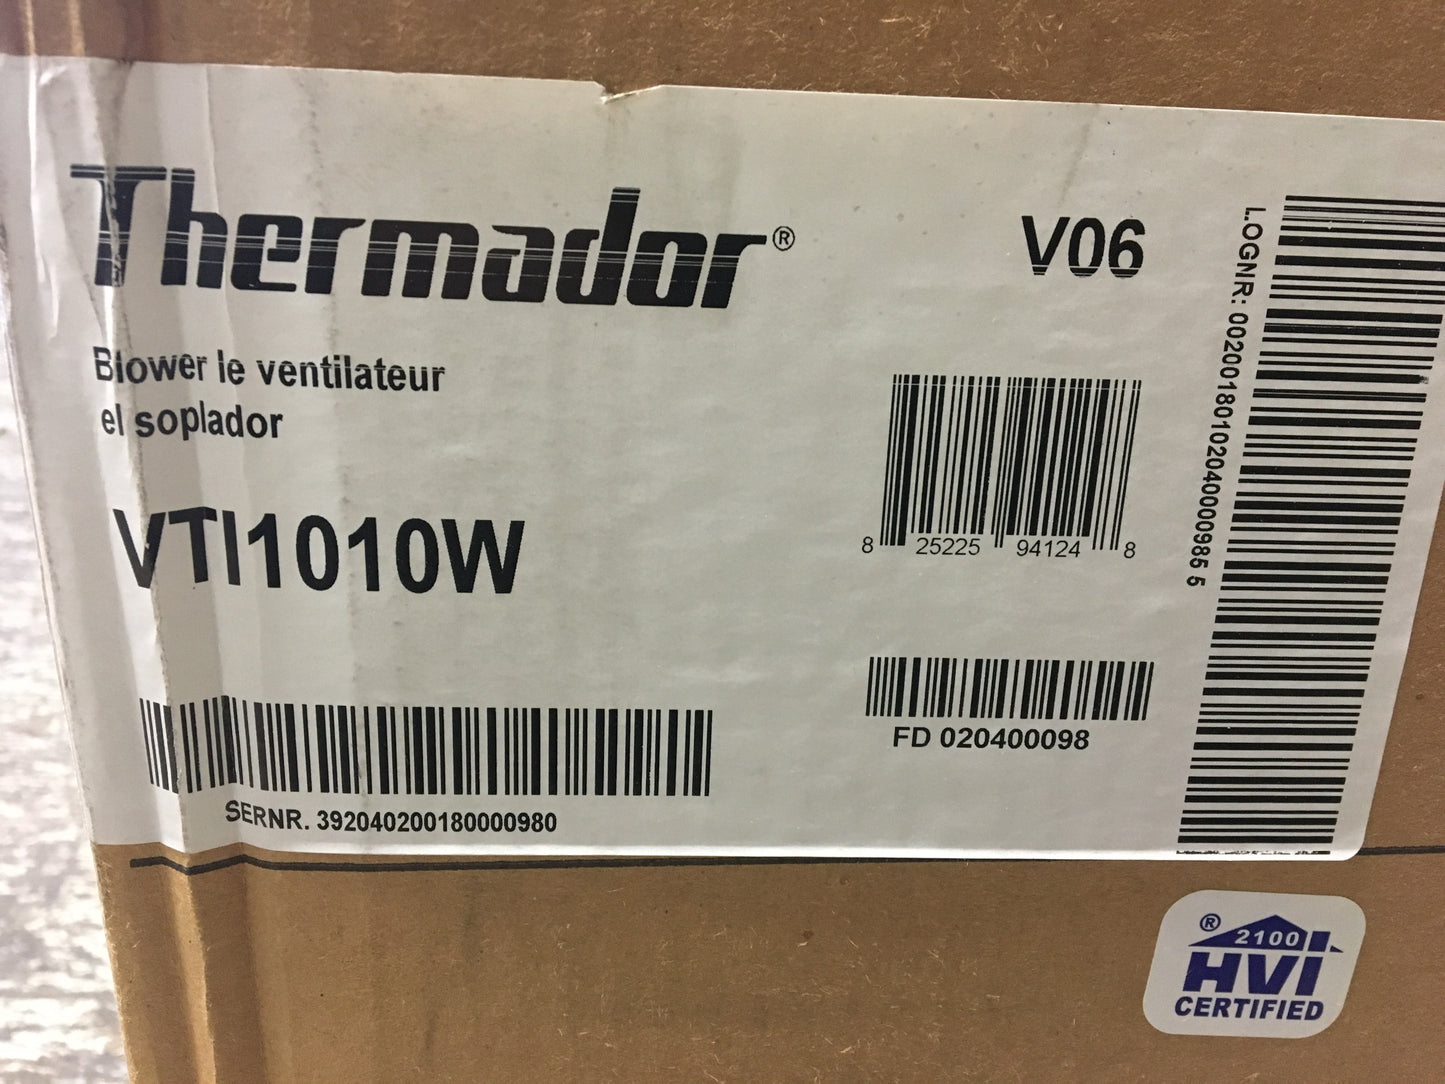 THERMADOR INLINE BLOWER STAINLESS STEEL CFM 1020 120/60/1